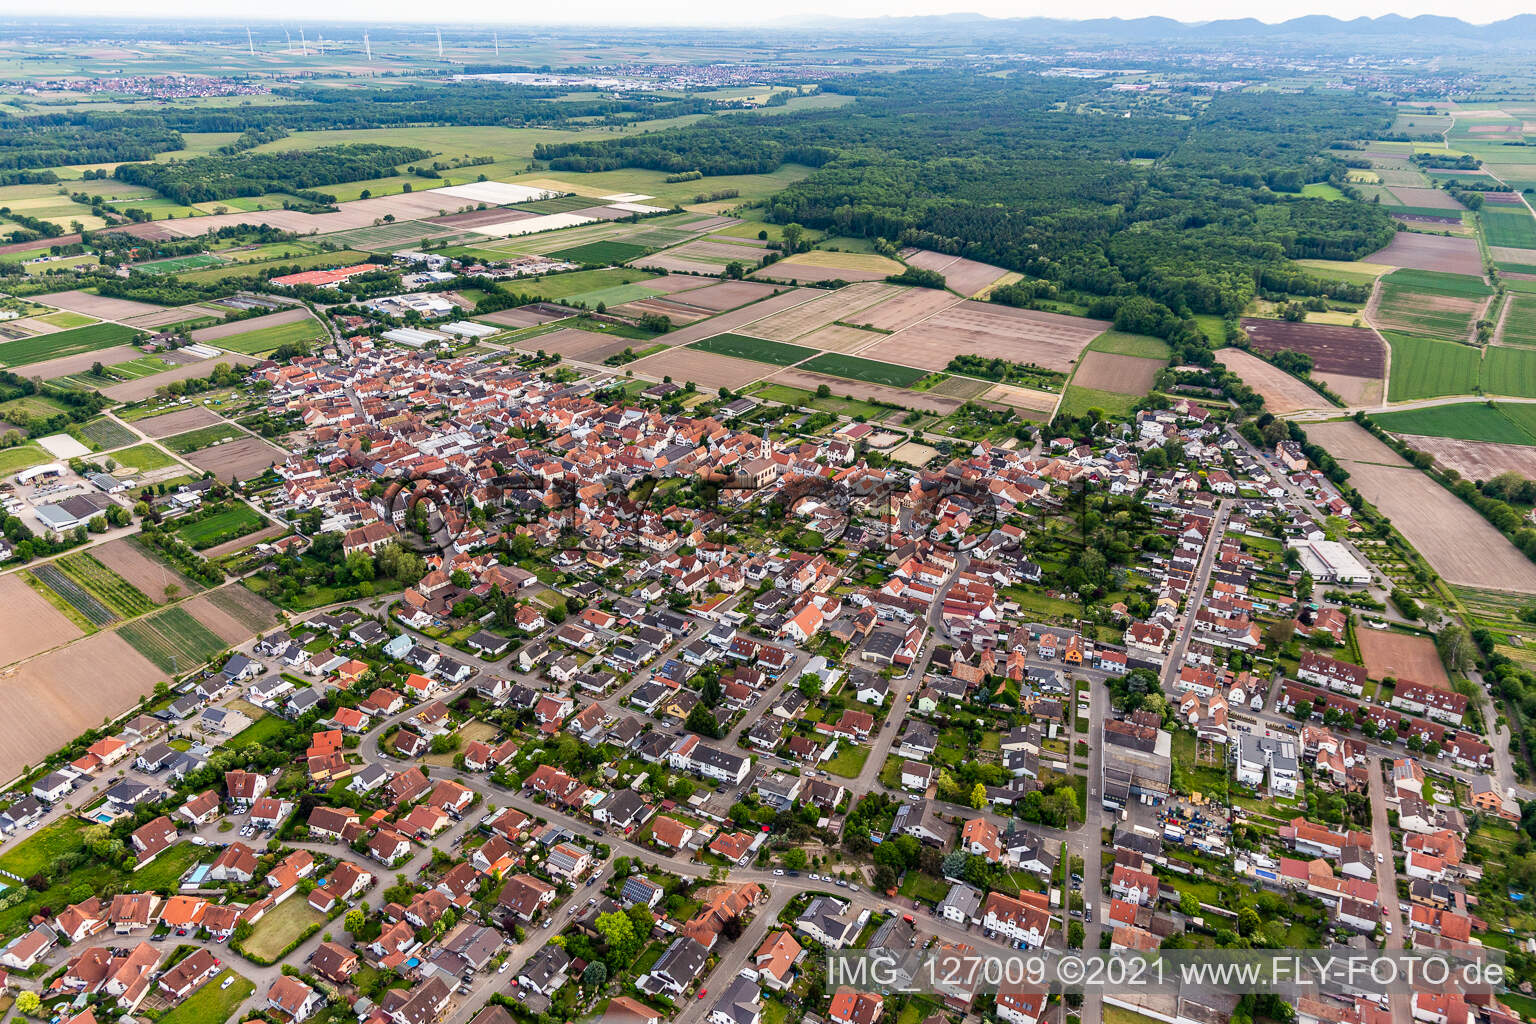 Zeiskam in the state Rhineland-Palatinate, Germany viewn from the air